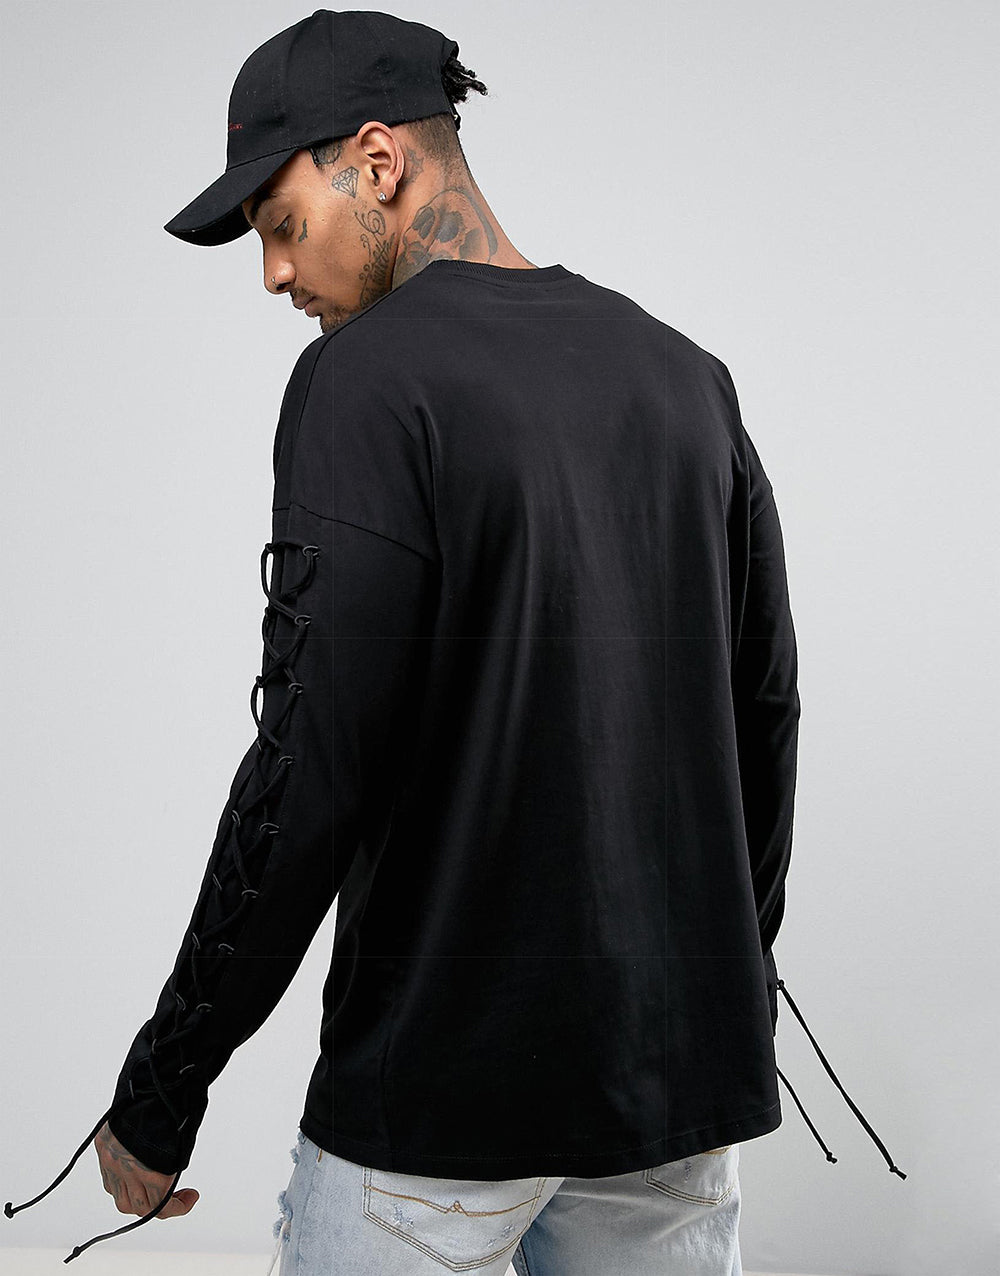 asos black t shirt Made for the modern man, these casuals are influenced by the latest music, technology, and social media trends lace asos street fashion urban wear urban clothing street clothing latest t shirt design modern clothing urban outfit stylish out fit trendy t shirts american style t shirts hiphop clothing standout tshirt 